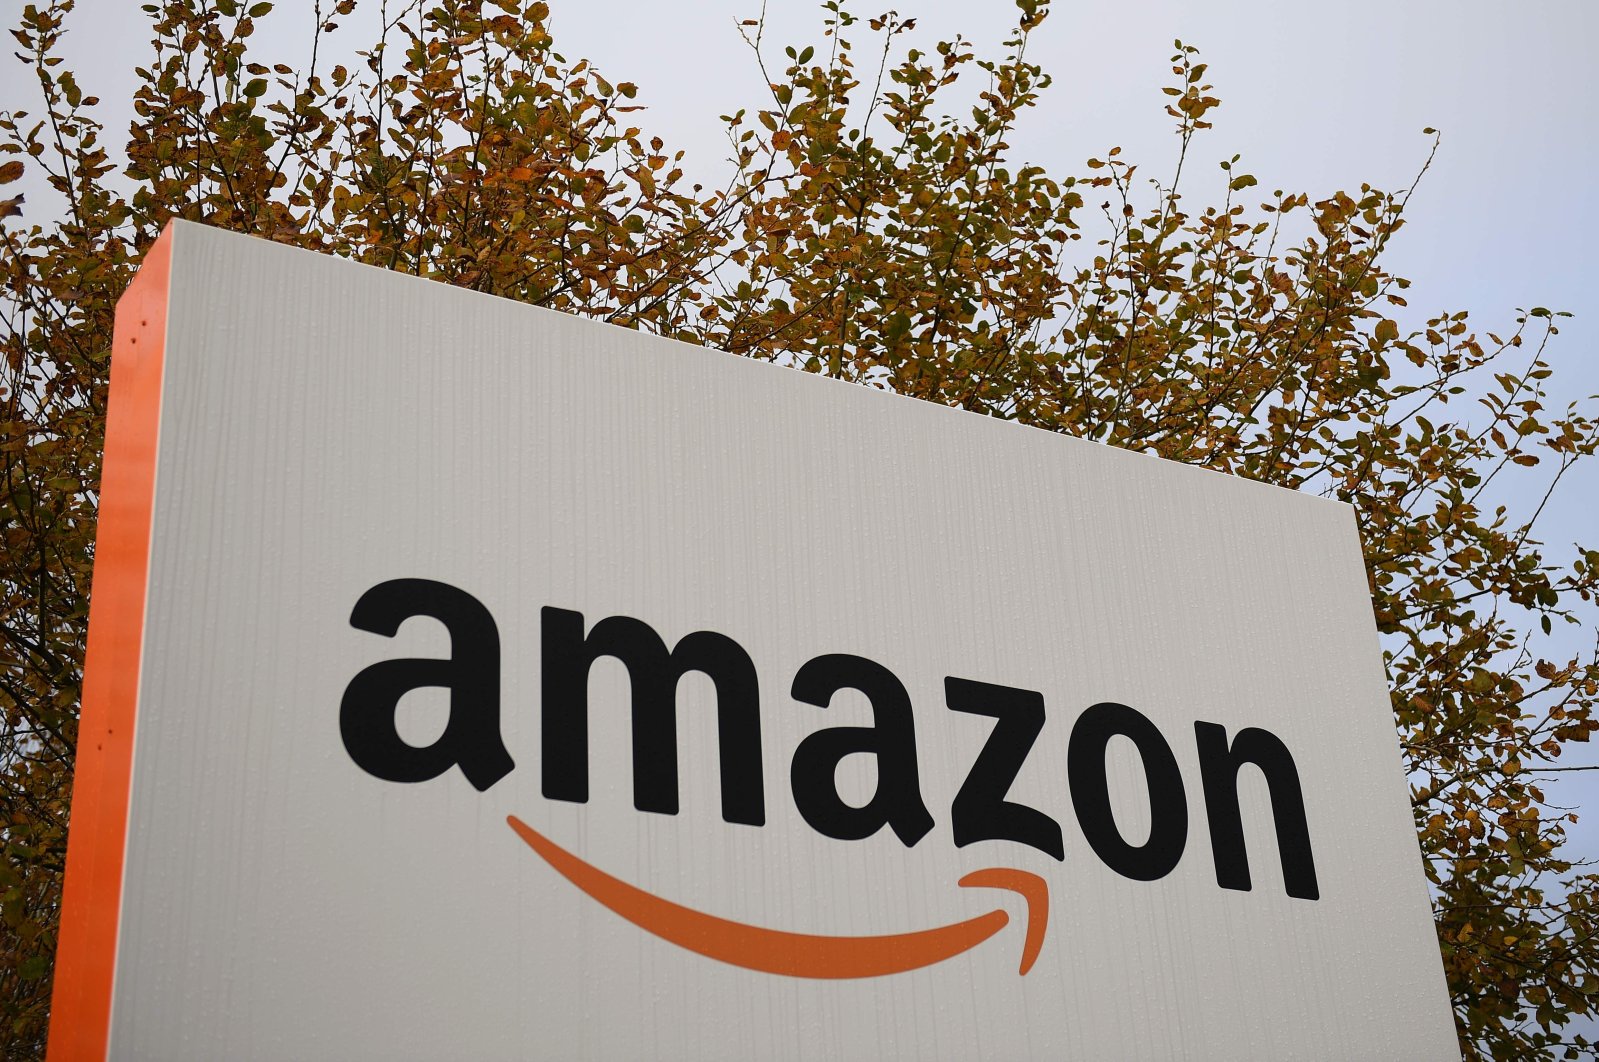 A sign is pictured at the Amazon Fulfilment Centre in Peterborough, eastern England, Nov. 27, 2019. (AFP Photo)